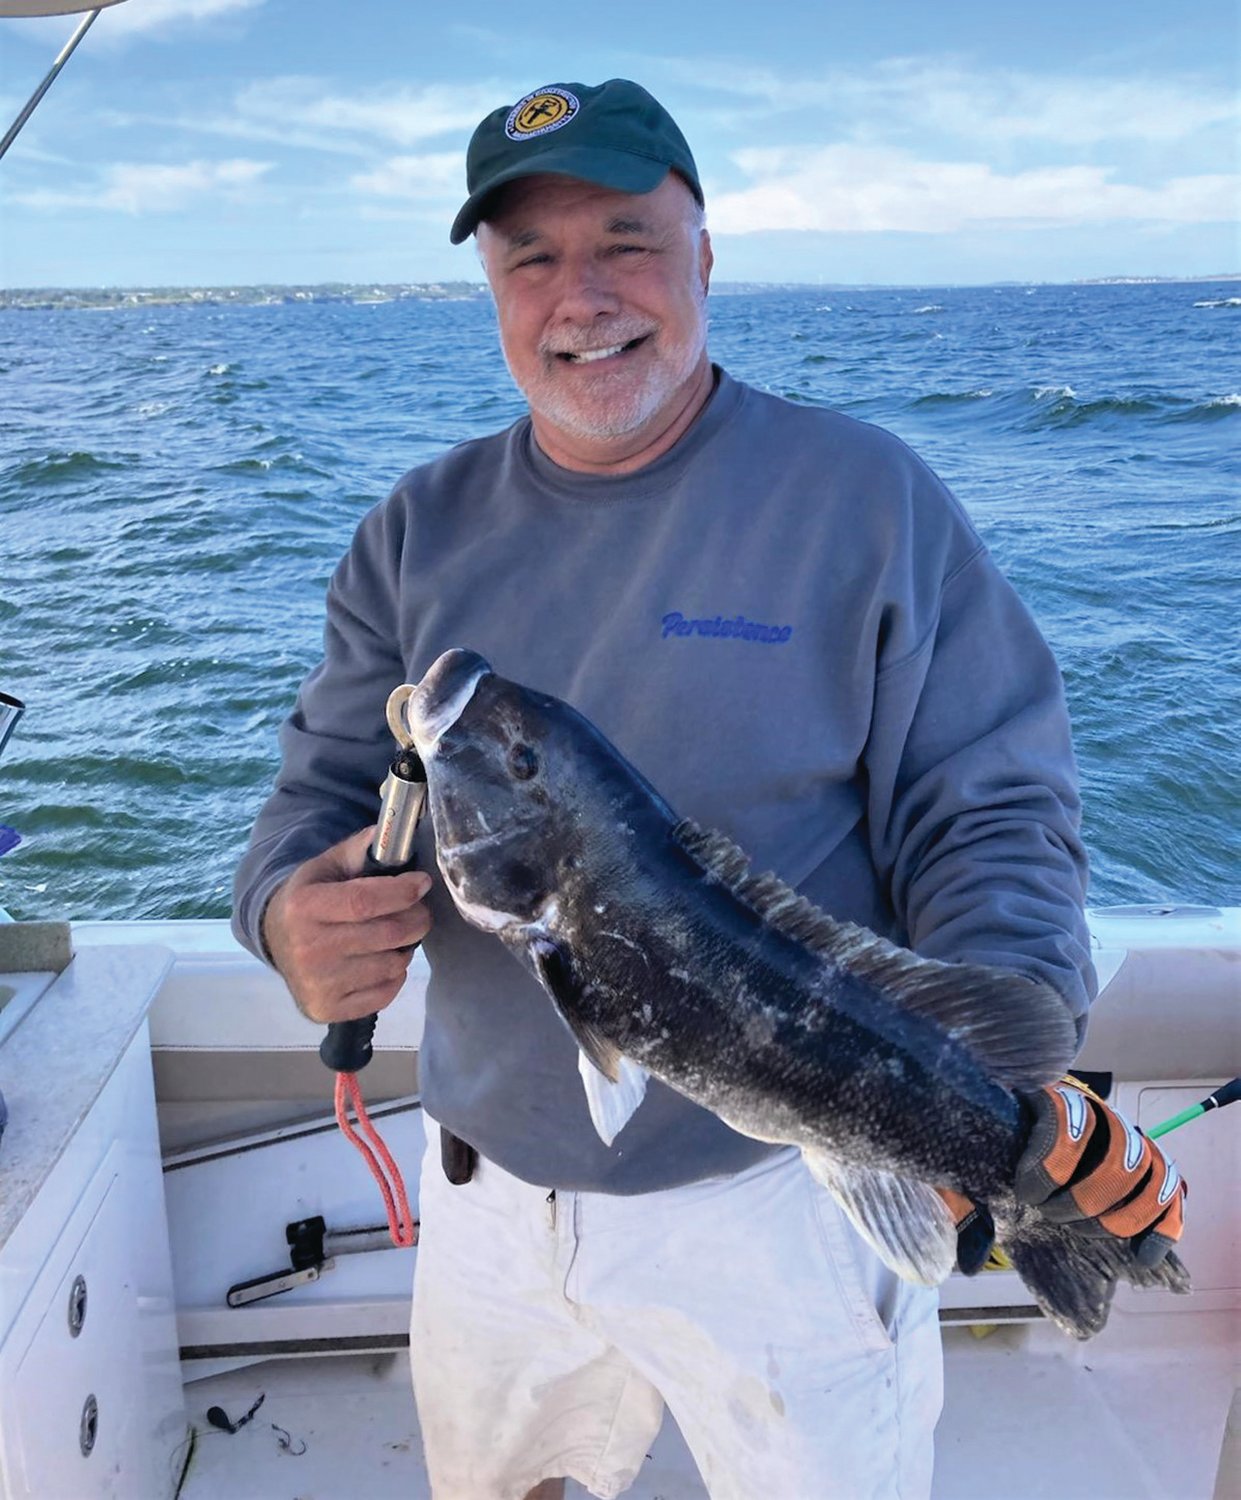 TAUTOG BITE STRONG: Greg Spier of Foxborough, Massachusetts, and Portsmouth, Rhode Island, with a 5.10 pound tautog he caught at the mouth of the Sakonnet River this week in 22 feet of water. The water was still warm, 71 degrees.